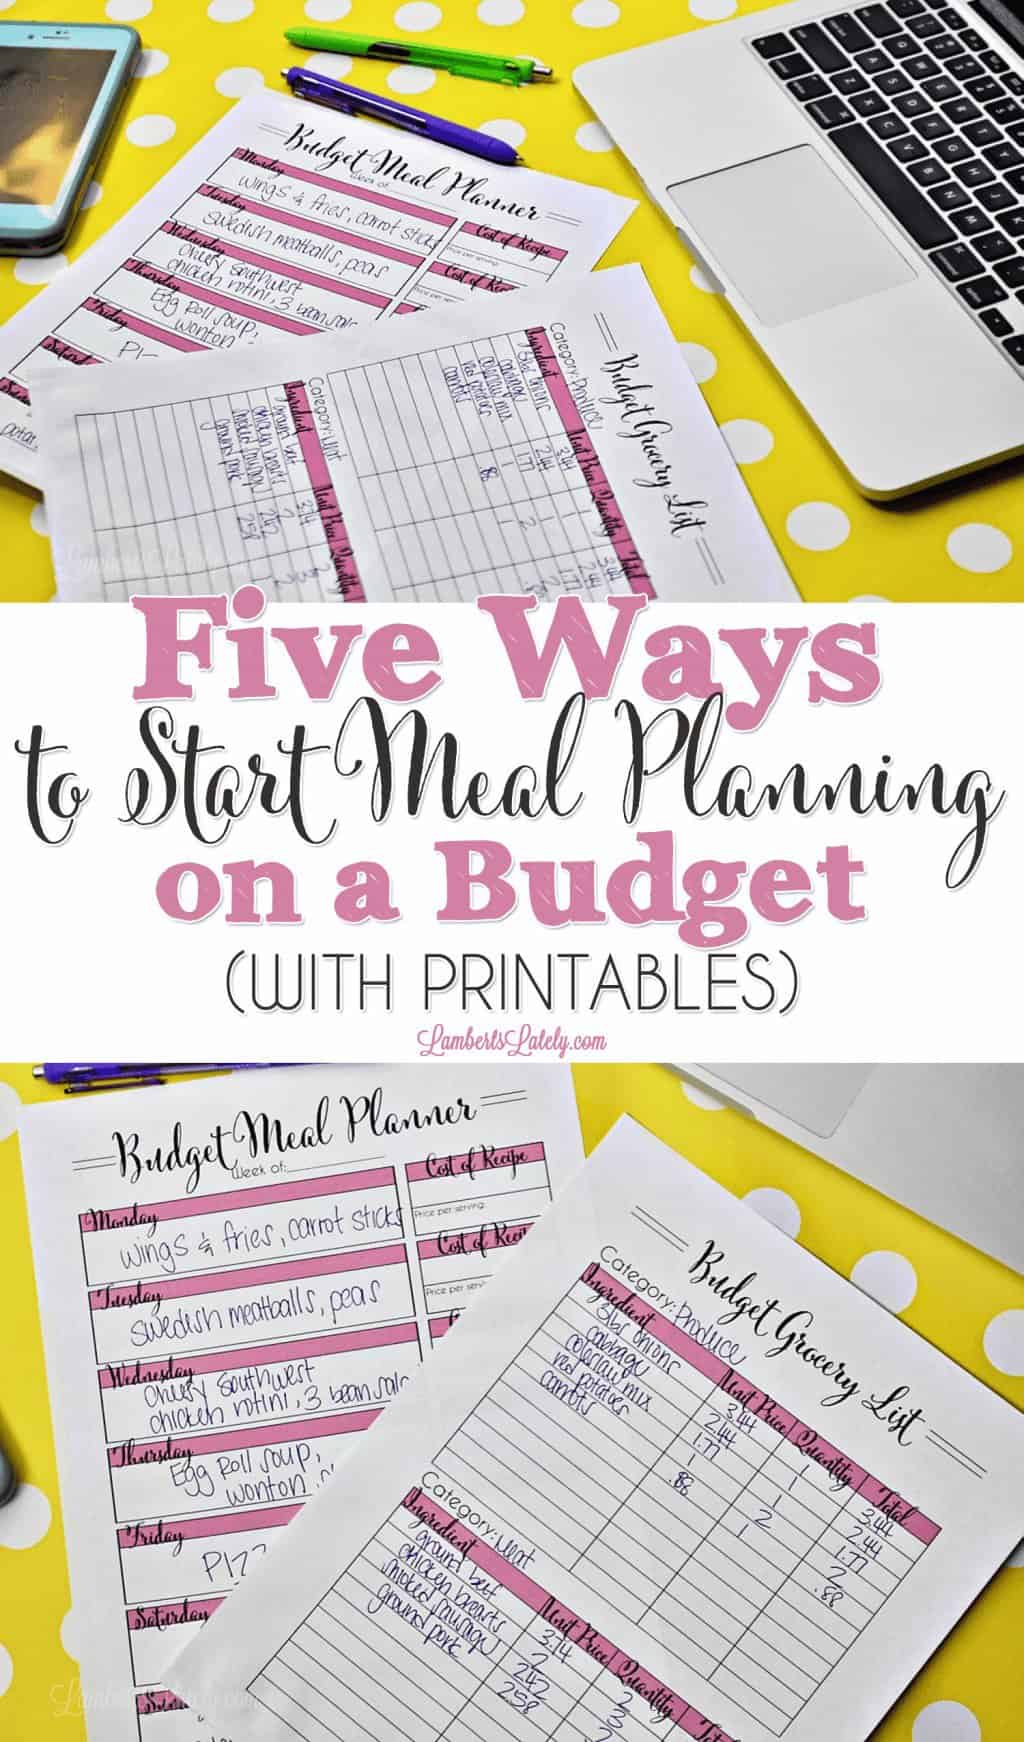 five ways to start meal planning on a budget with printables.